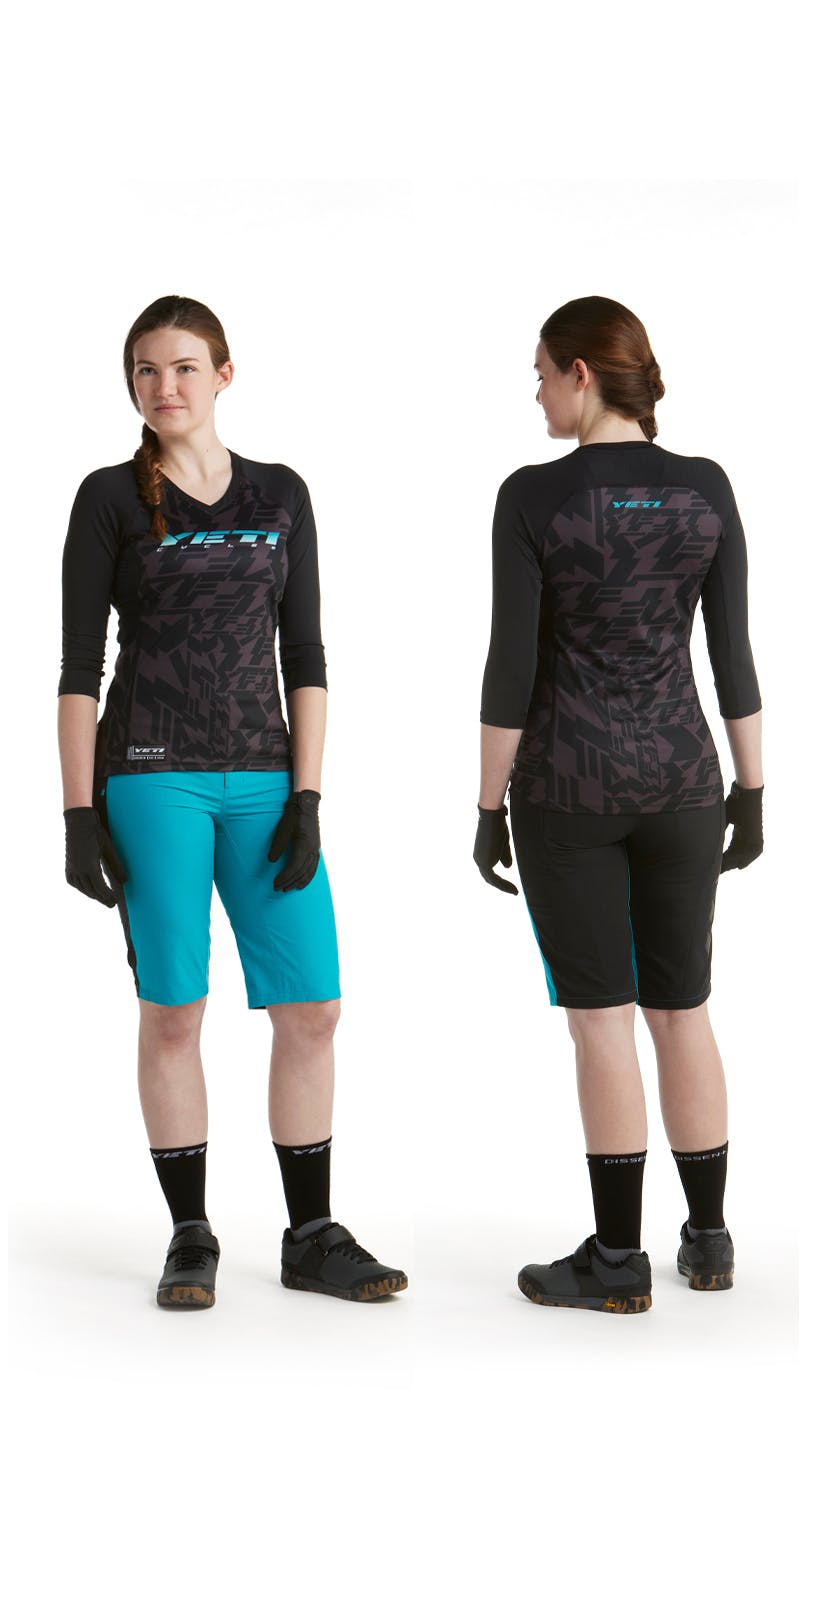 W'S Enduro 3/4 Jersey and W'S Enduro Short